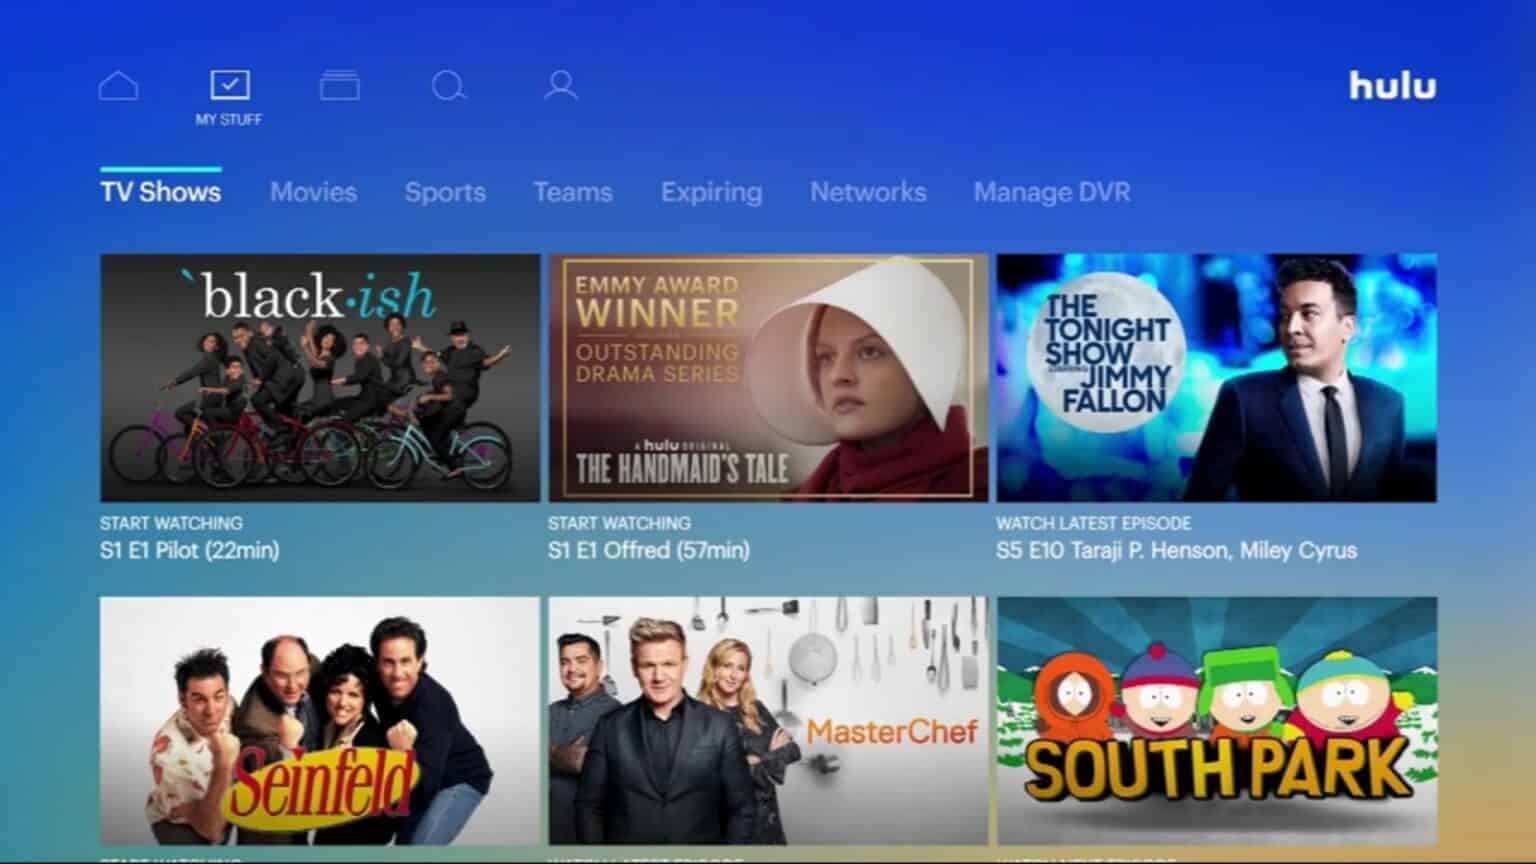 Does Hulu's international expansion plan include UK launch?